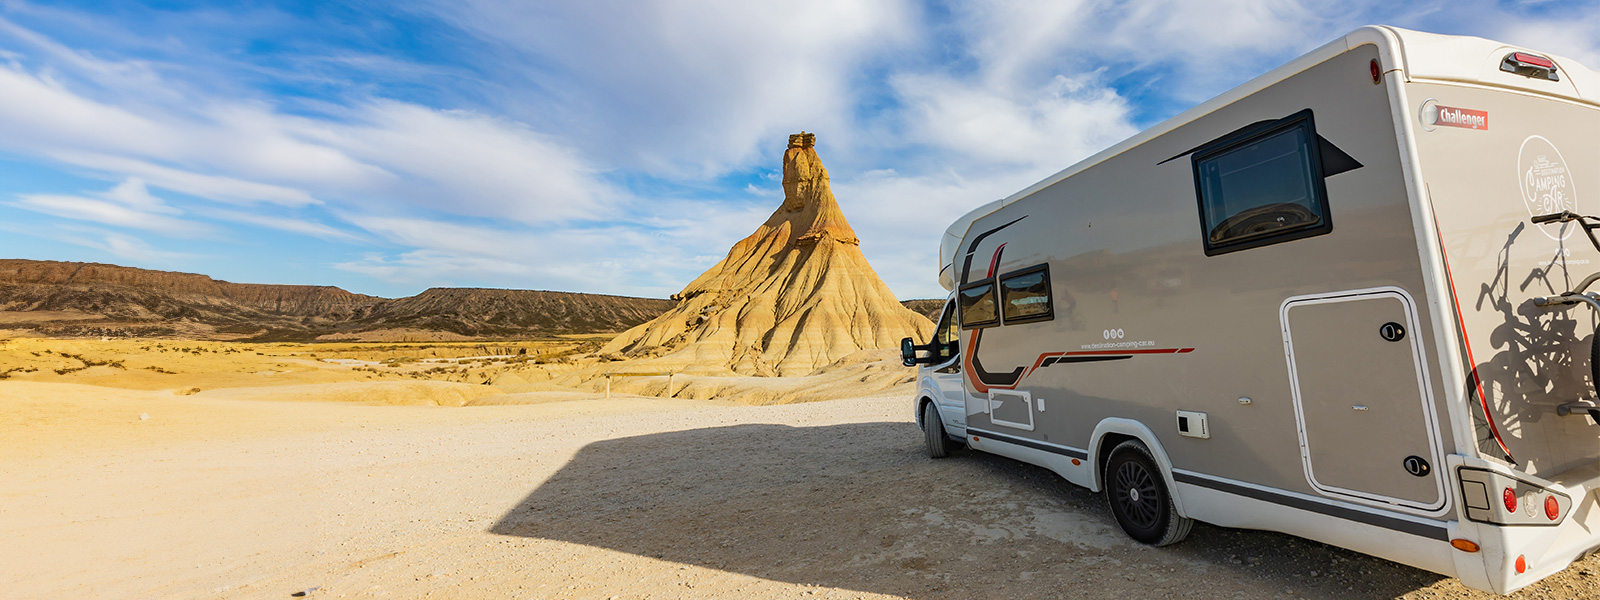 Motorhome rental with unlimited mileage